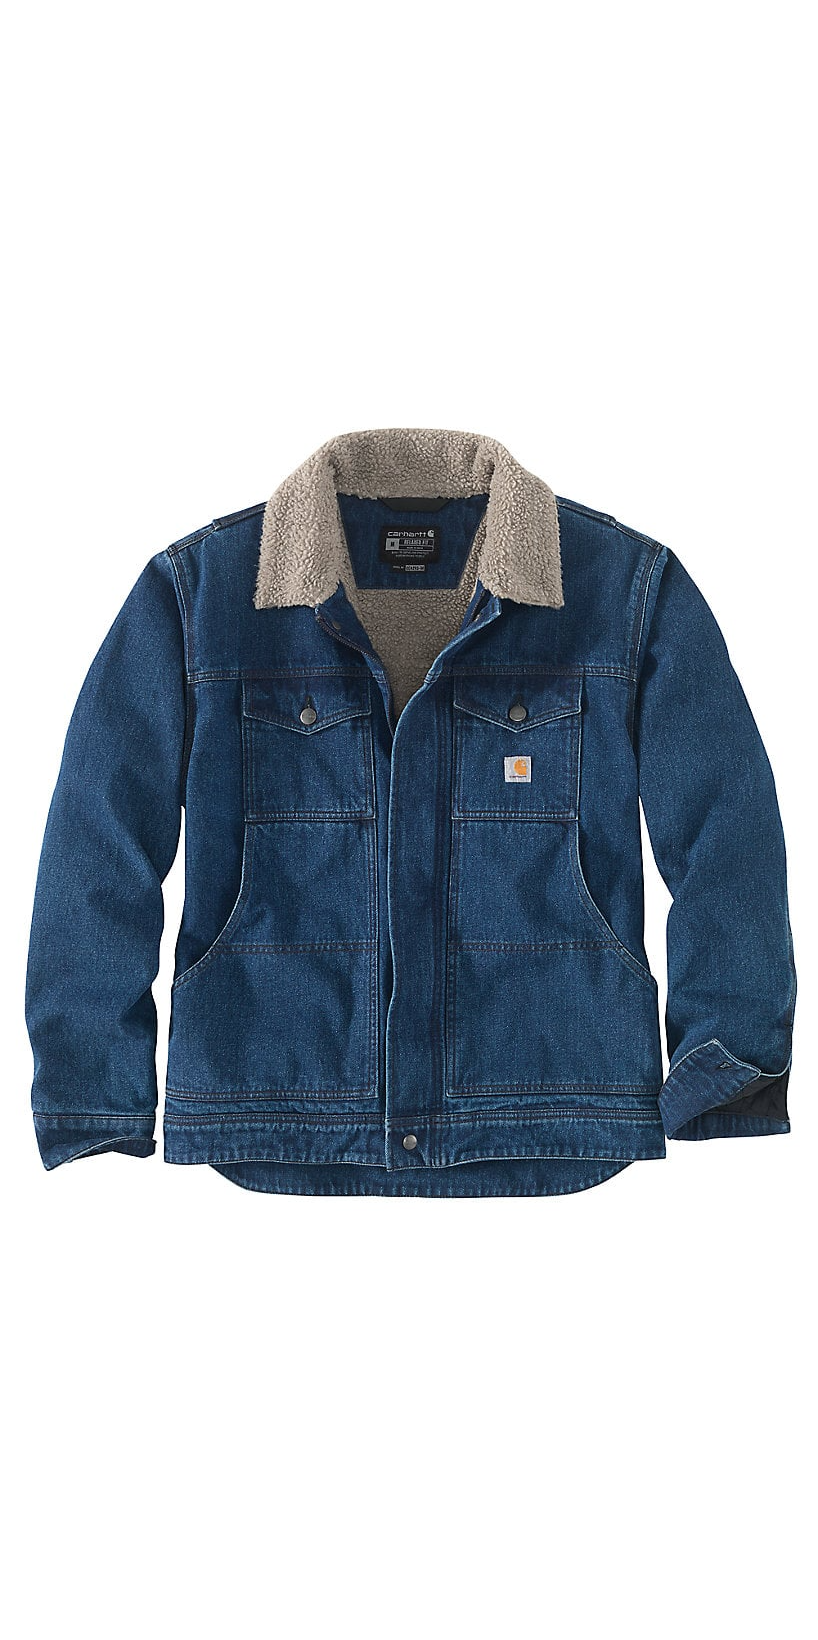 Carhartt Relaxed Fit Denim Sherpa-Lined Jacket – Army Navy Now